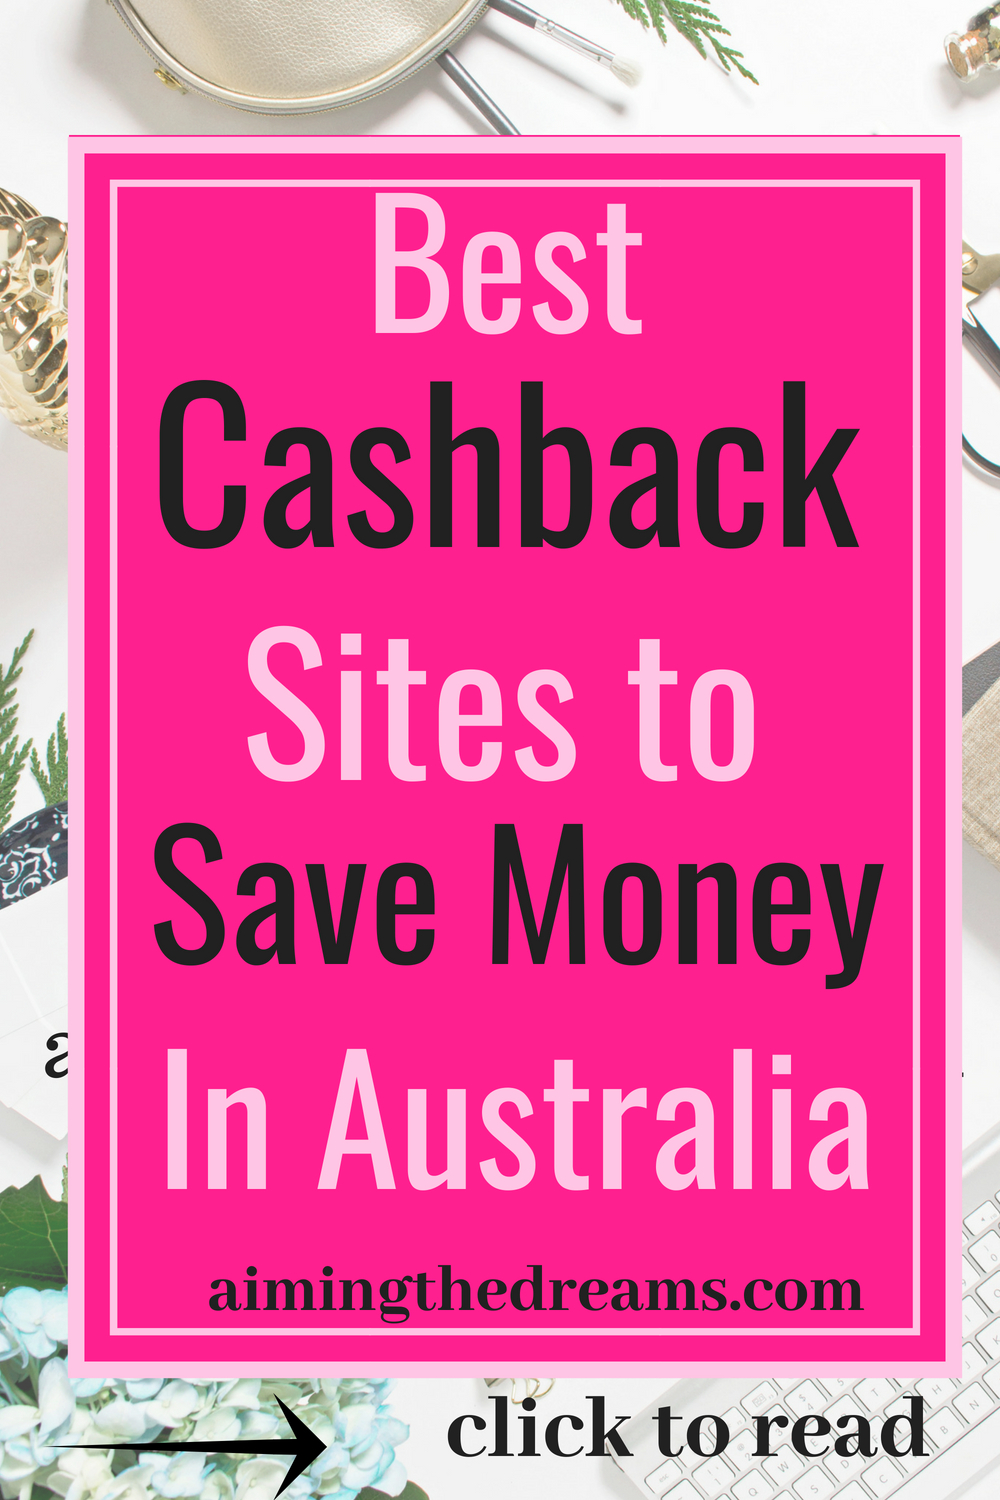 #Cashback #sites and #appps to #make #money in #Australia.Click to read. These sites pay you money back as you #shop #online through these.